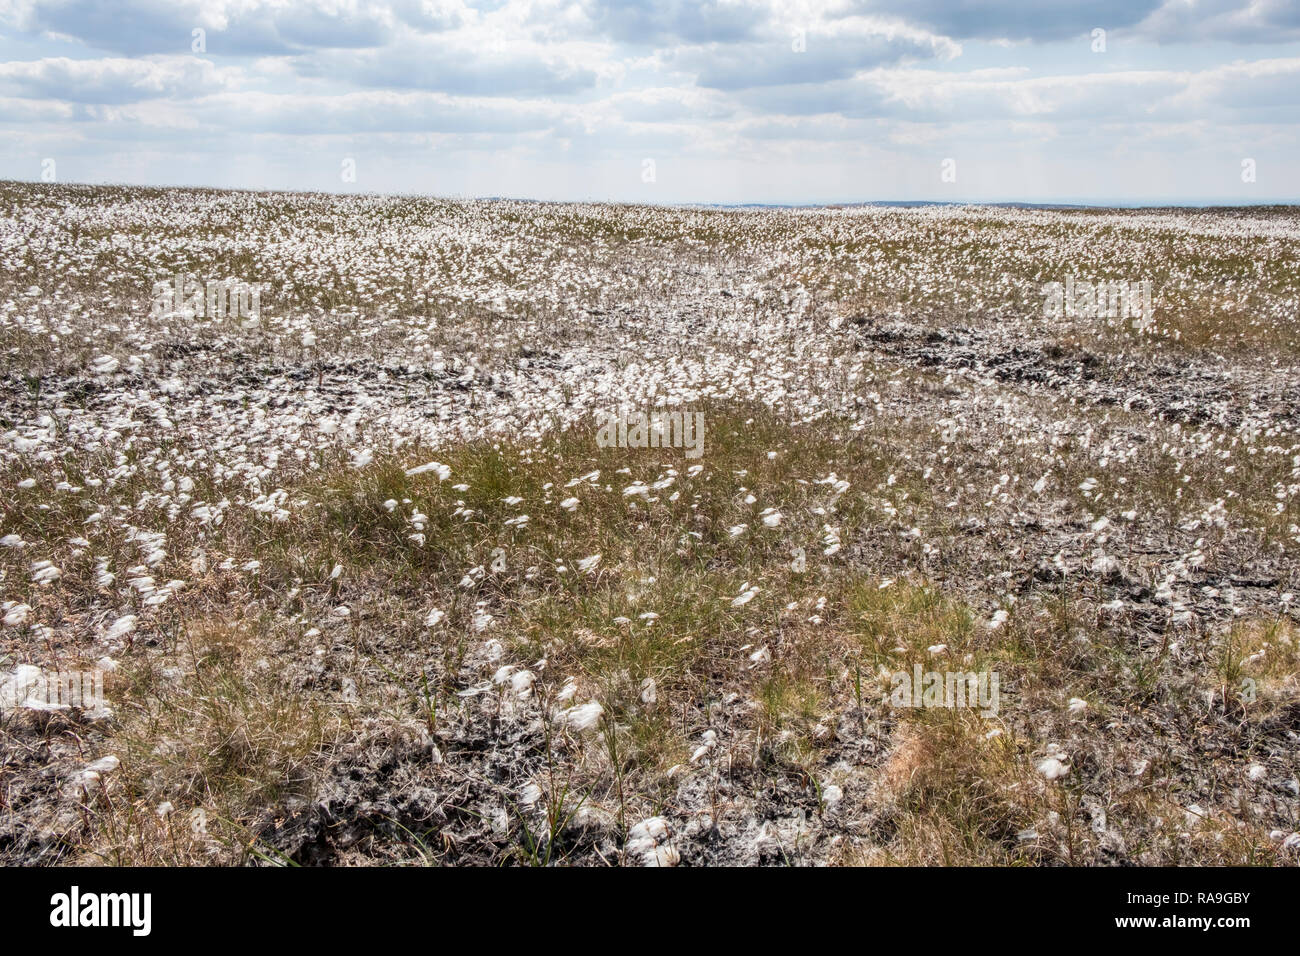 Moorland restoration. Cotton grass blowing in the wind on a recently restored moor at Brown Knoll, Derbyshire, Peak District, England, UK Stock Photo